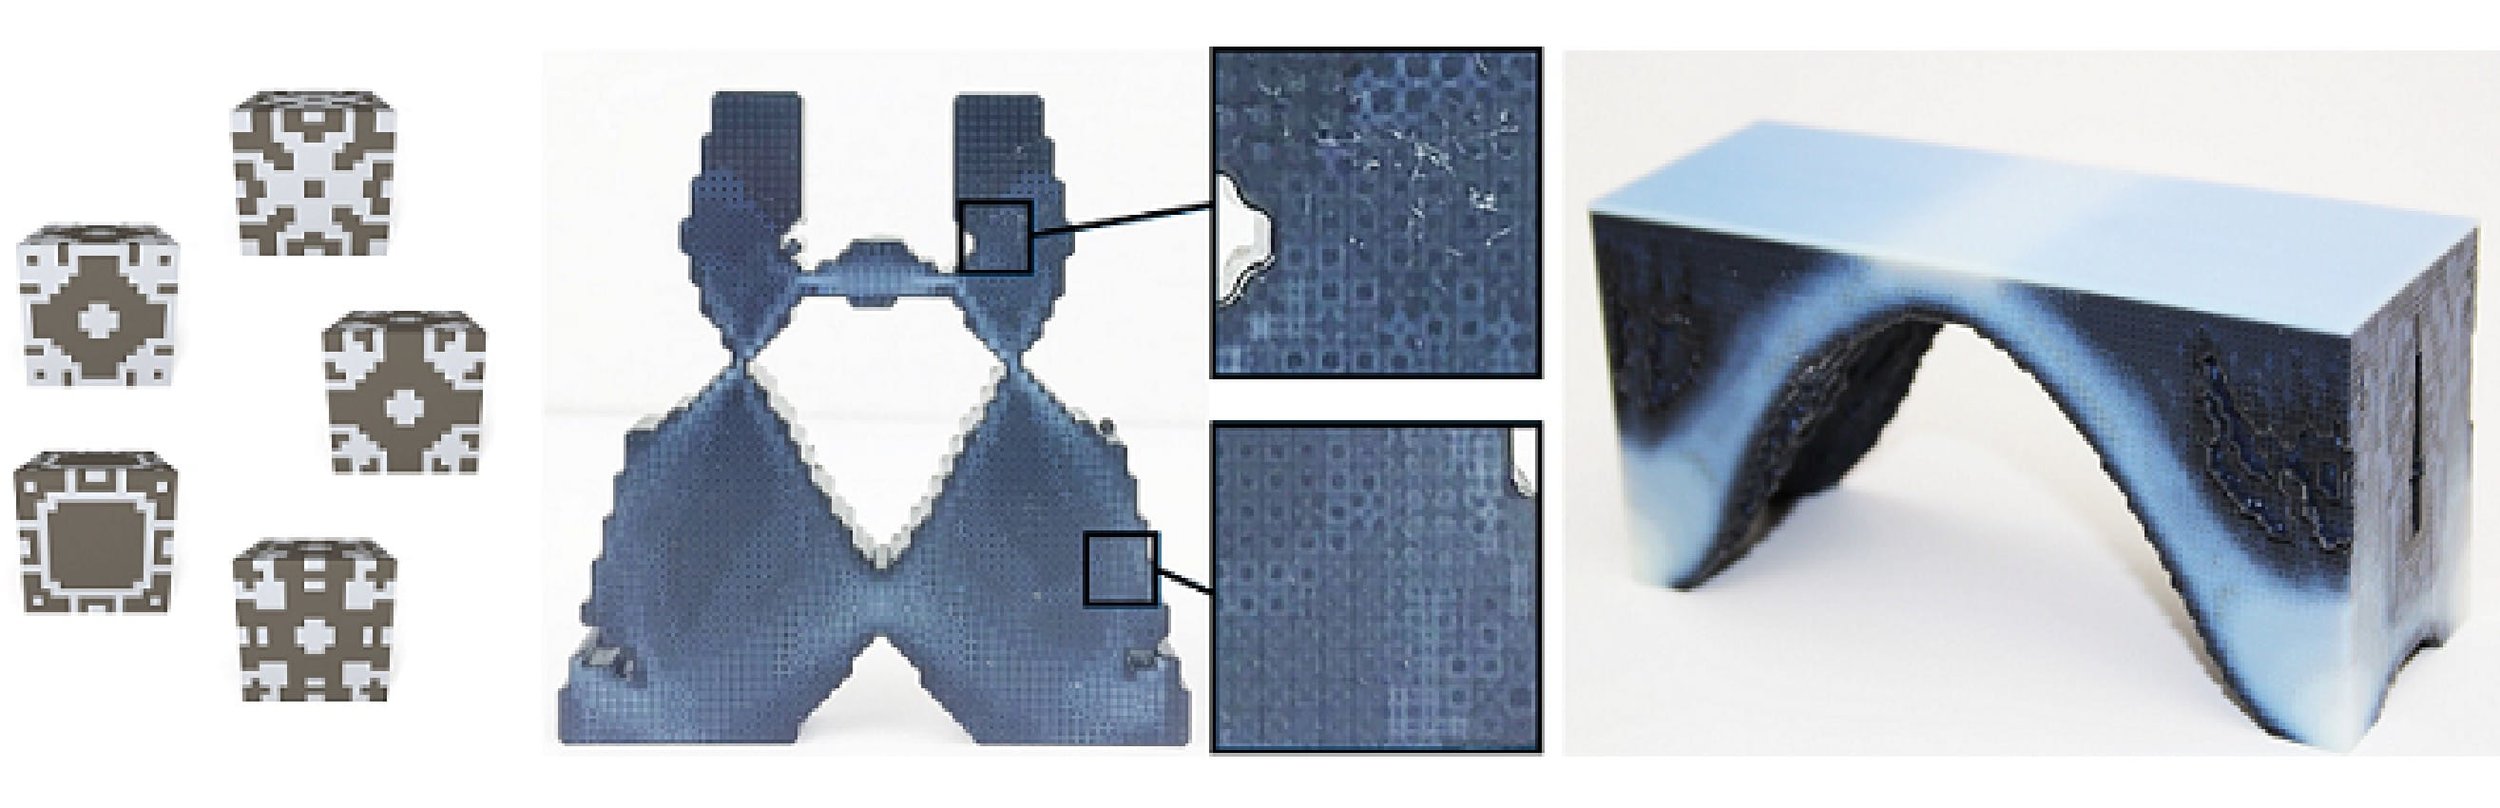  Microstructures (left) are combined together (middle) to create functional objects (right) 